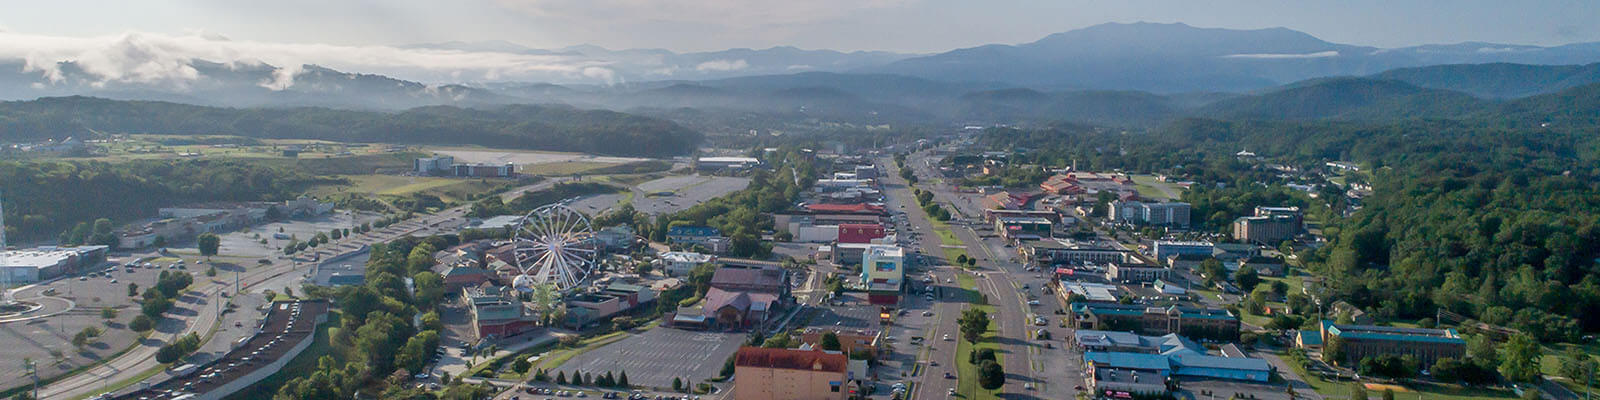 Pigeon Forge tourism on the rebound